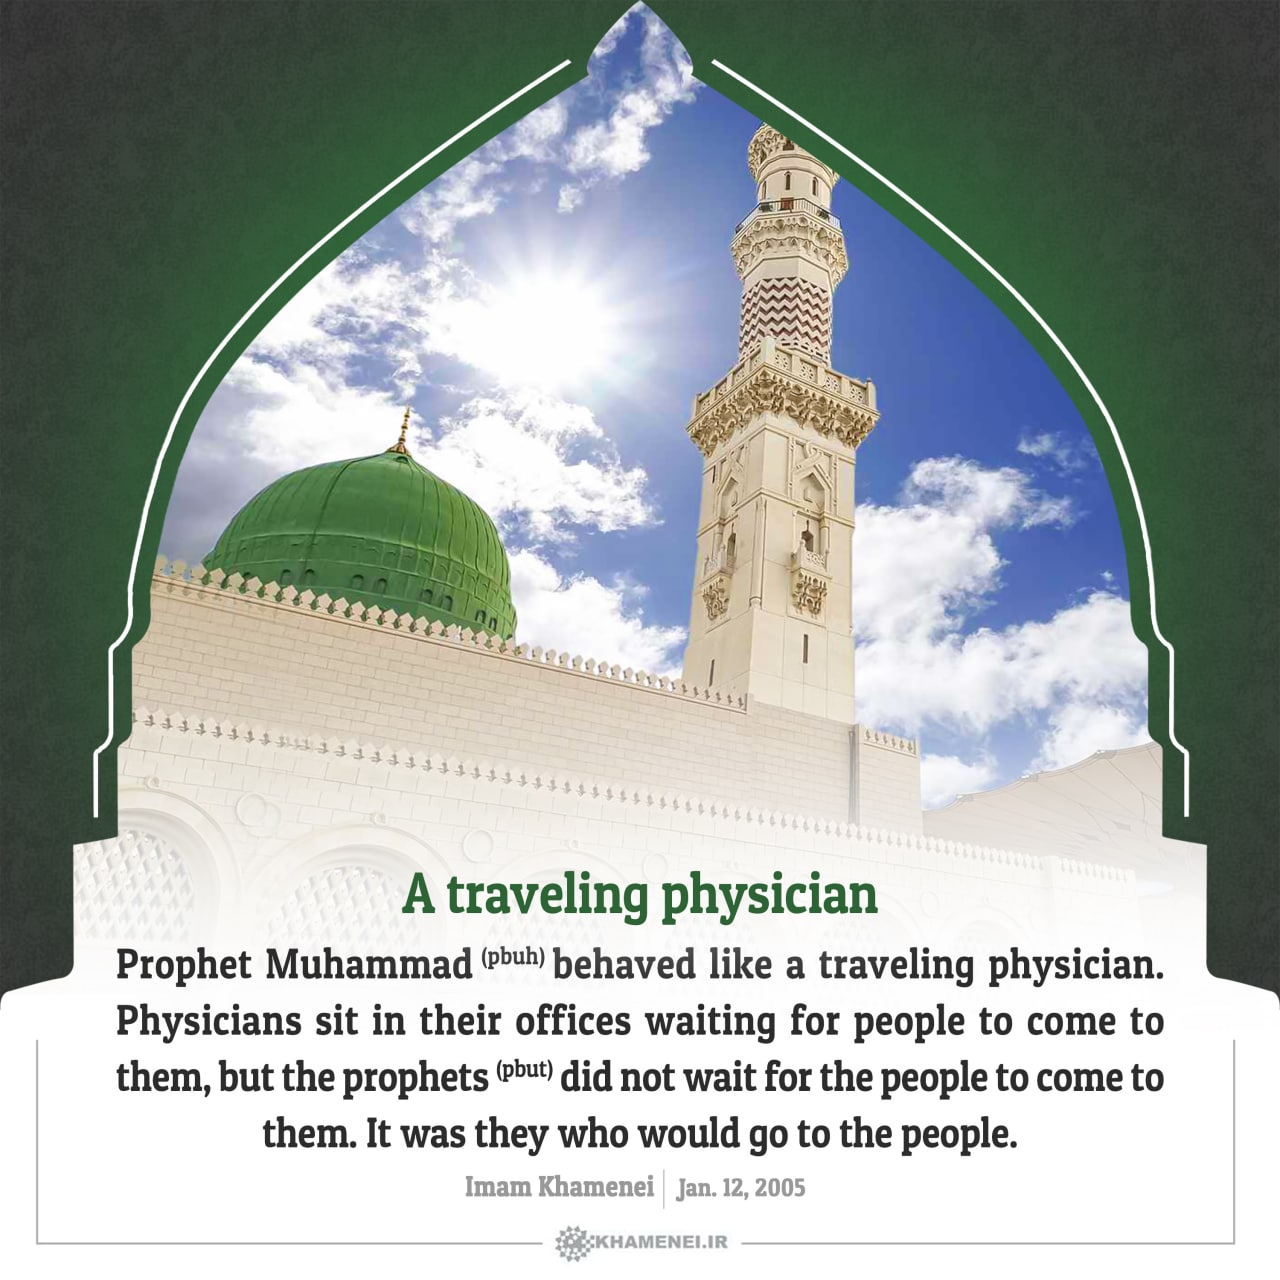 A traveling physician